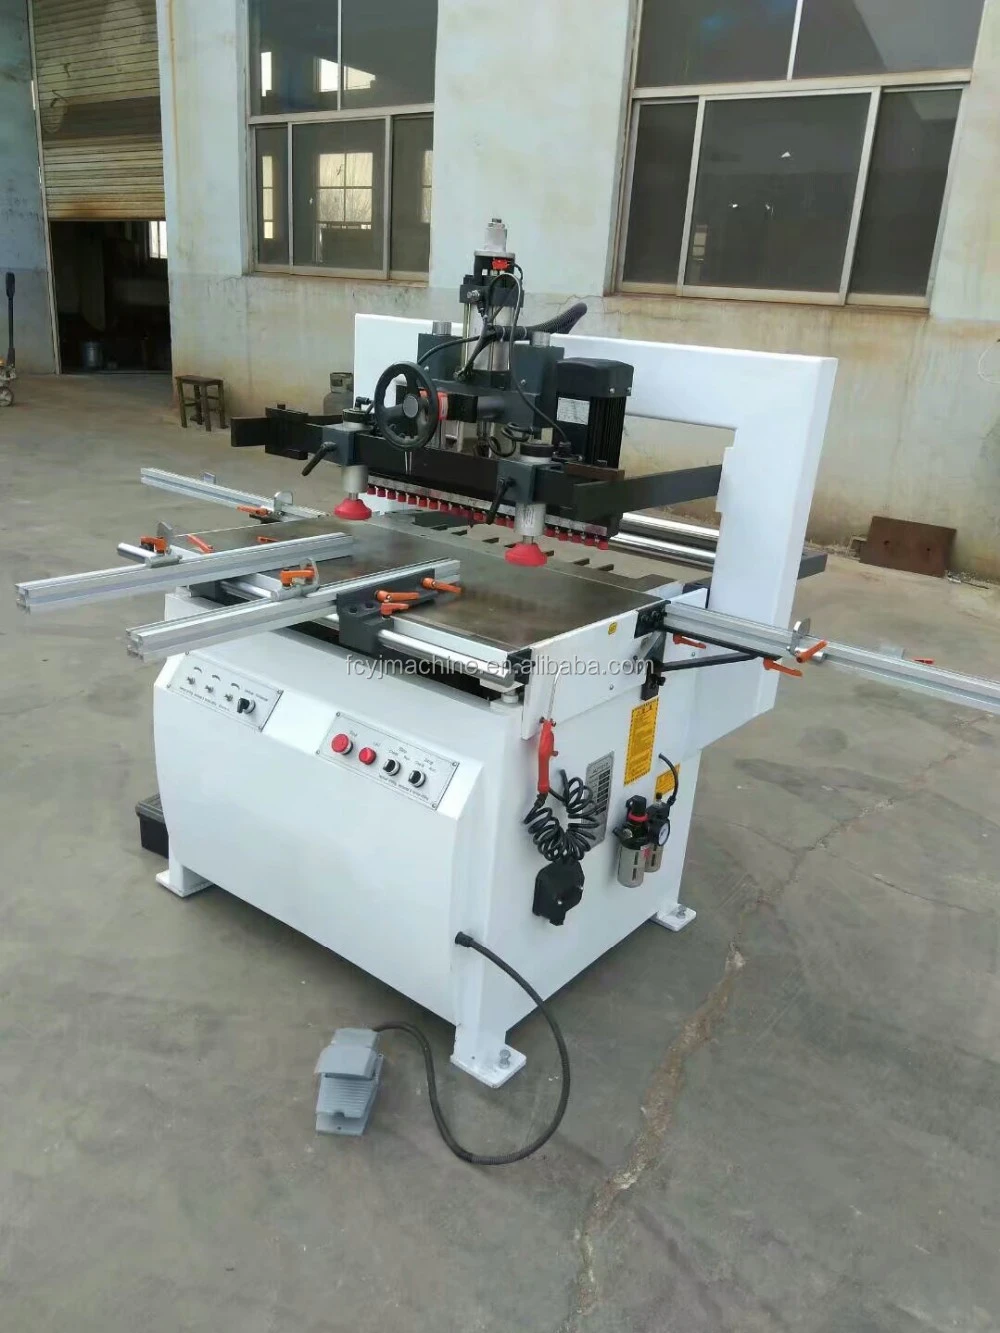 two row spindles wood boring machine woodworking drilling